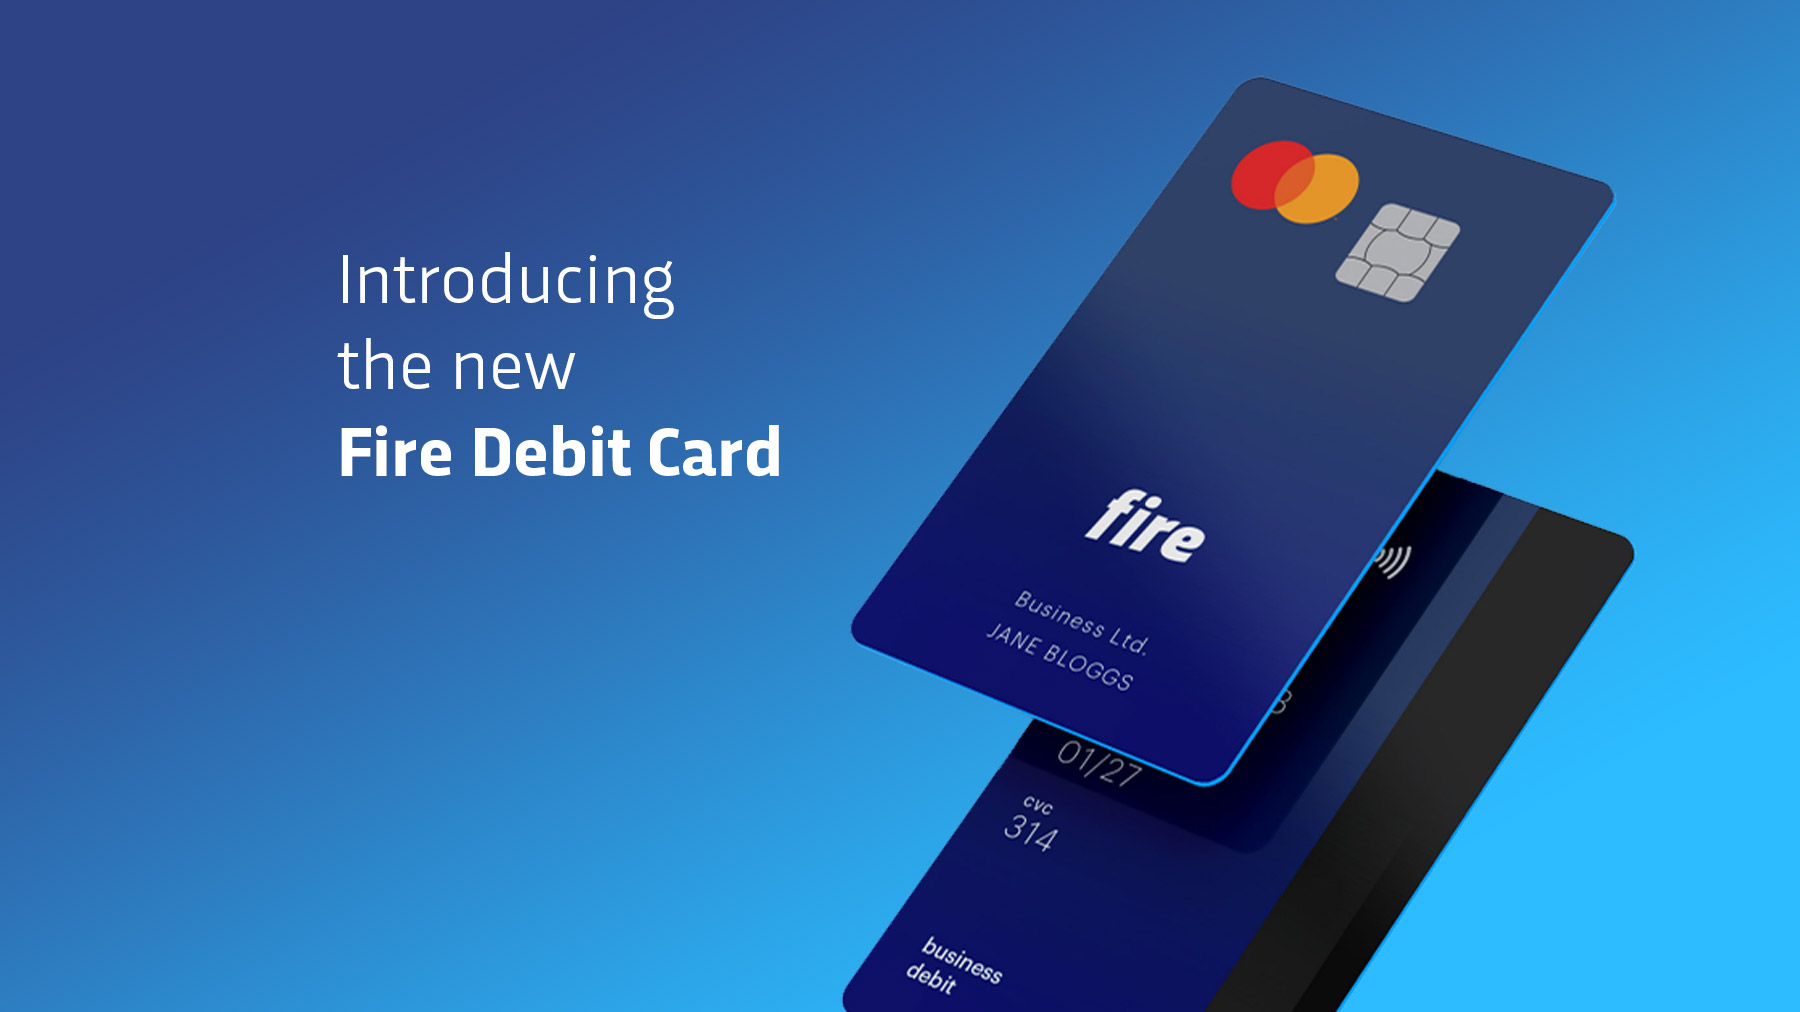 Introducing the new Fire Debit Card